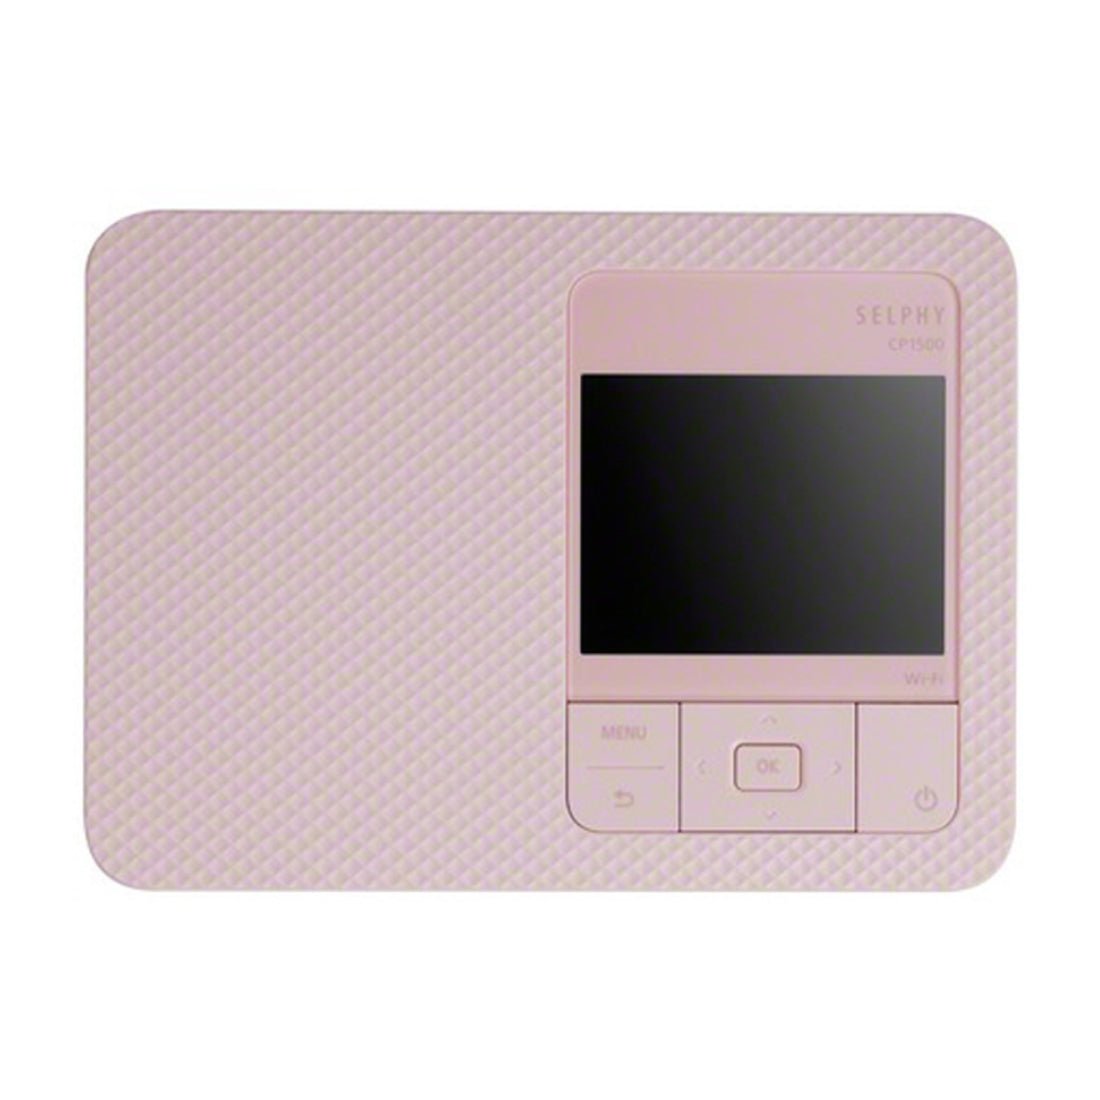 Canon SELPHY CP1500 Printer - Pink - طابعة - Store 974 | ستور ٩٧٤